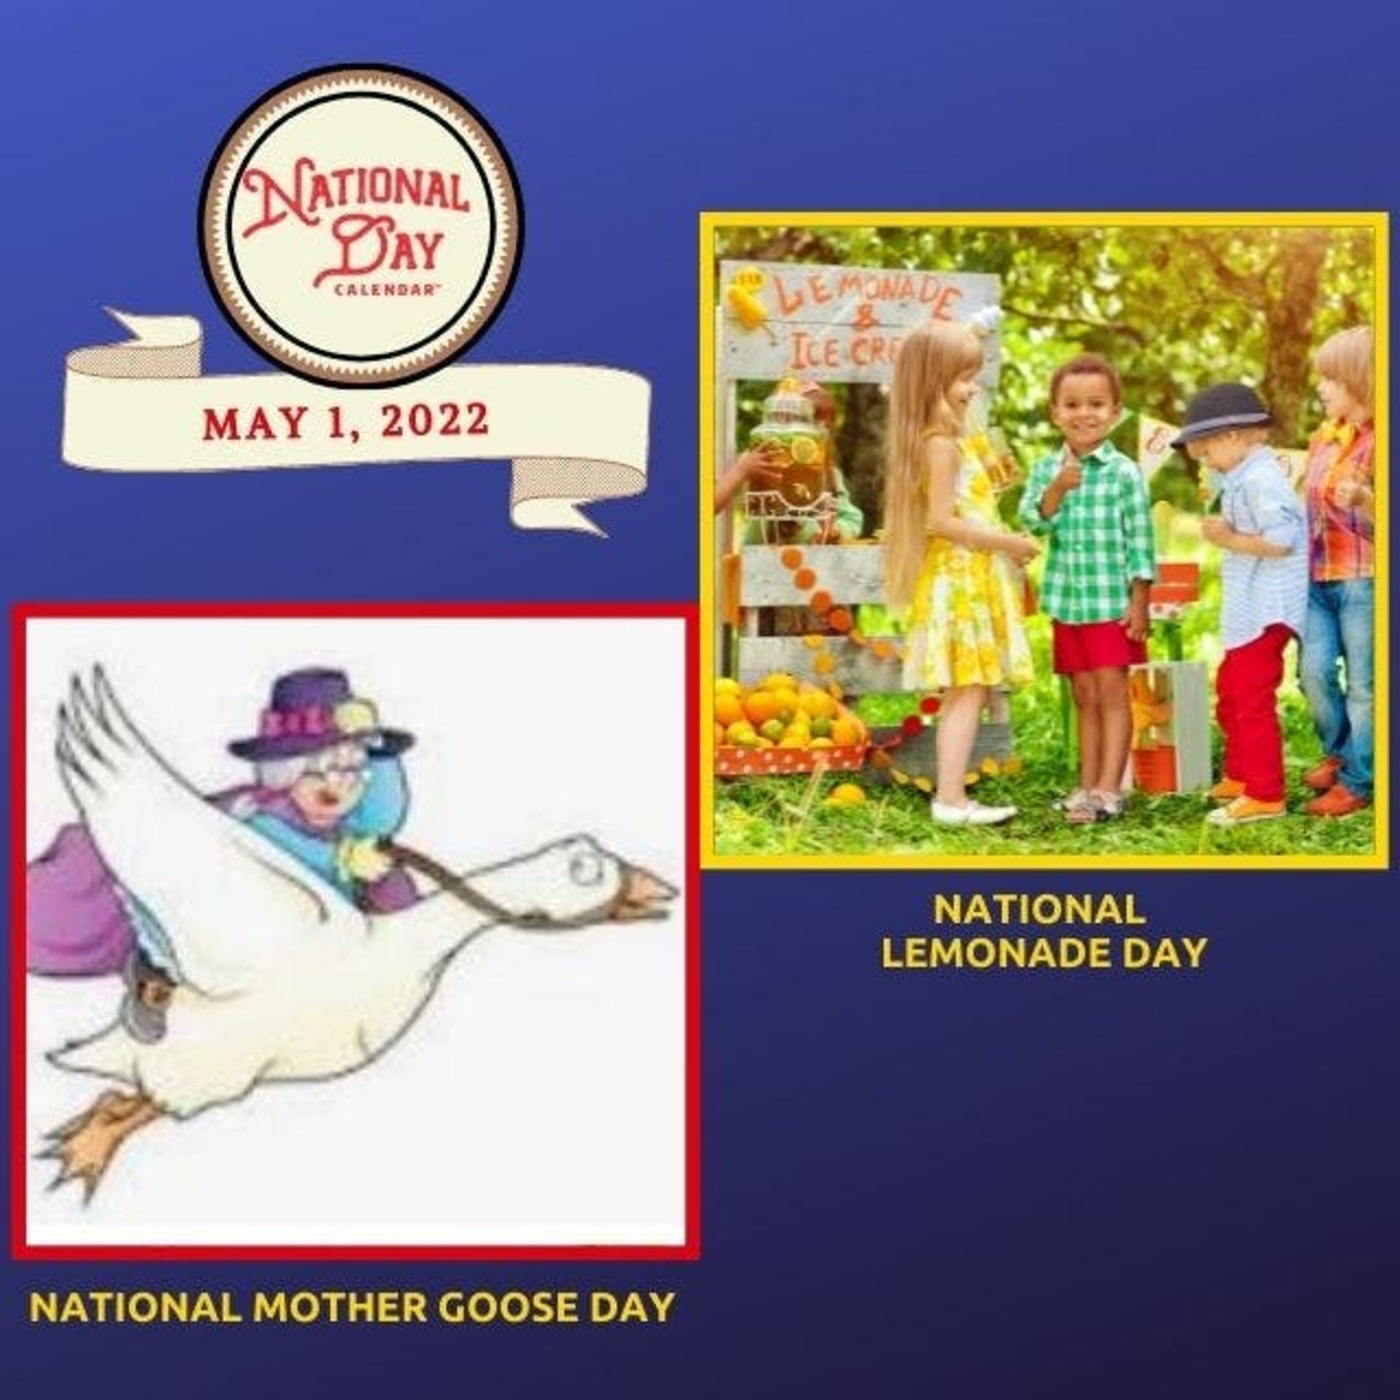 Celebrate Every Day cover image